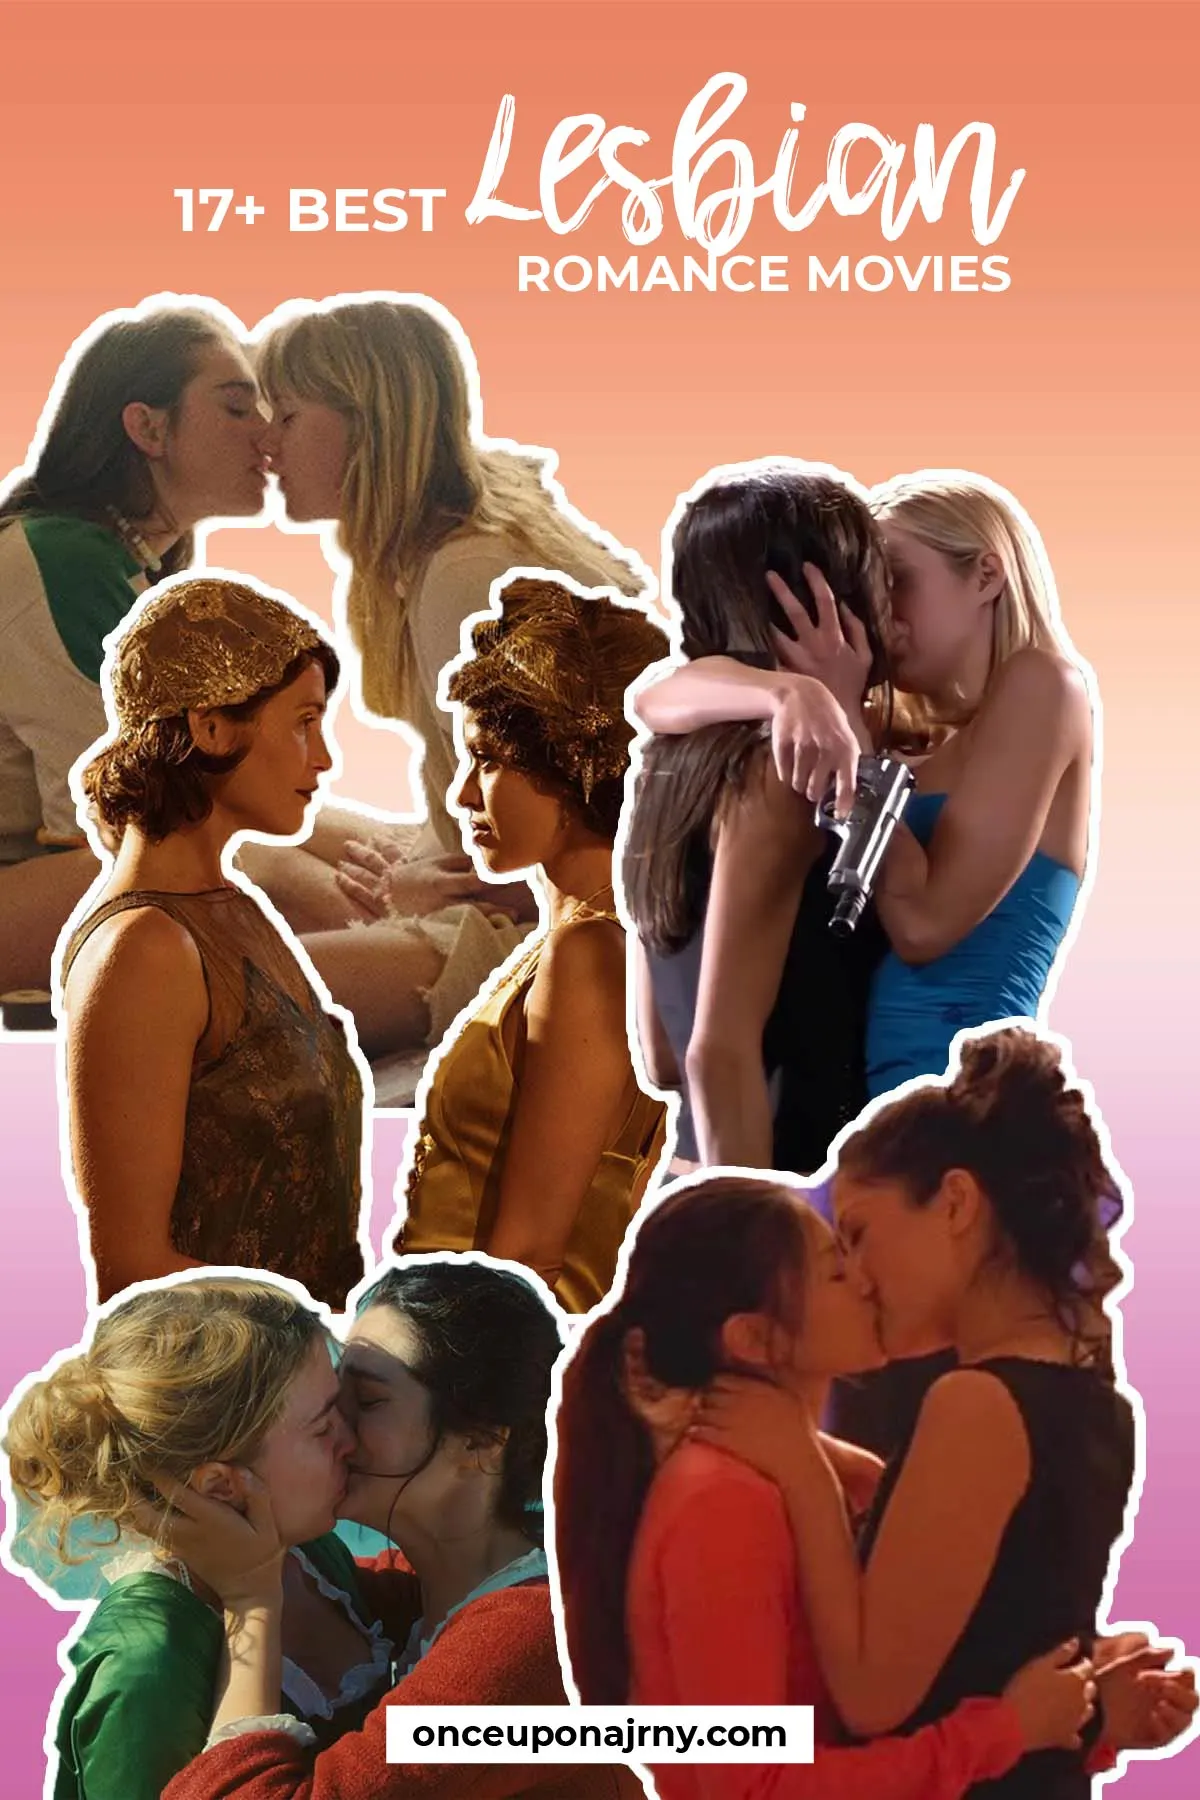 andy mccardell recommends Free Interracial Lesbian Movies